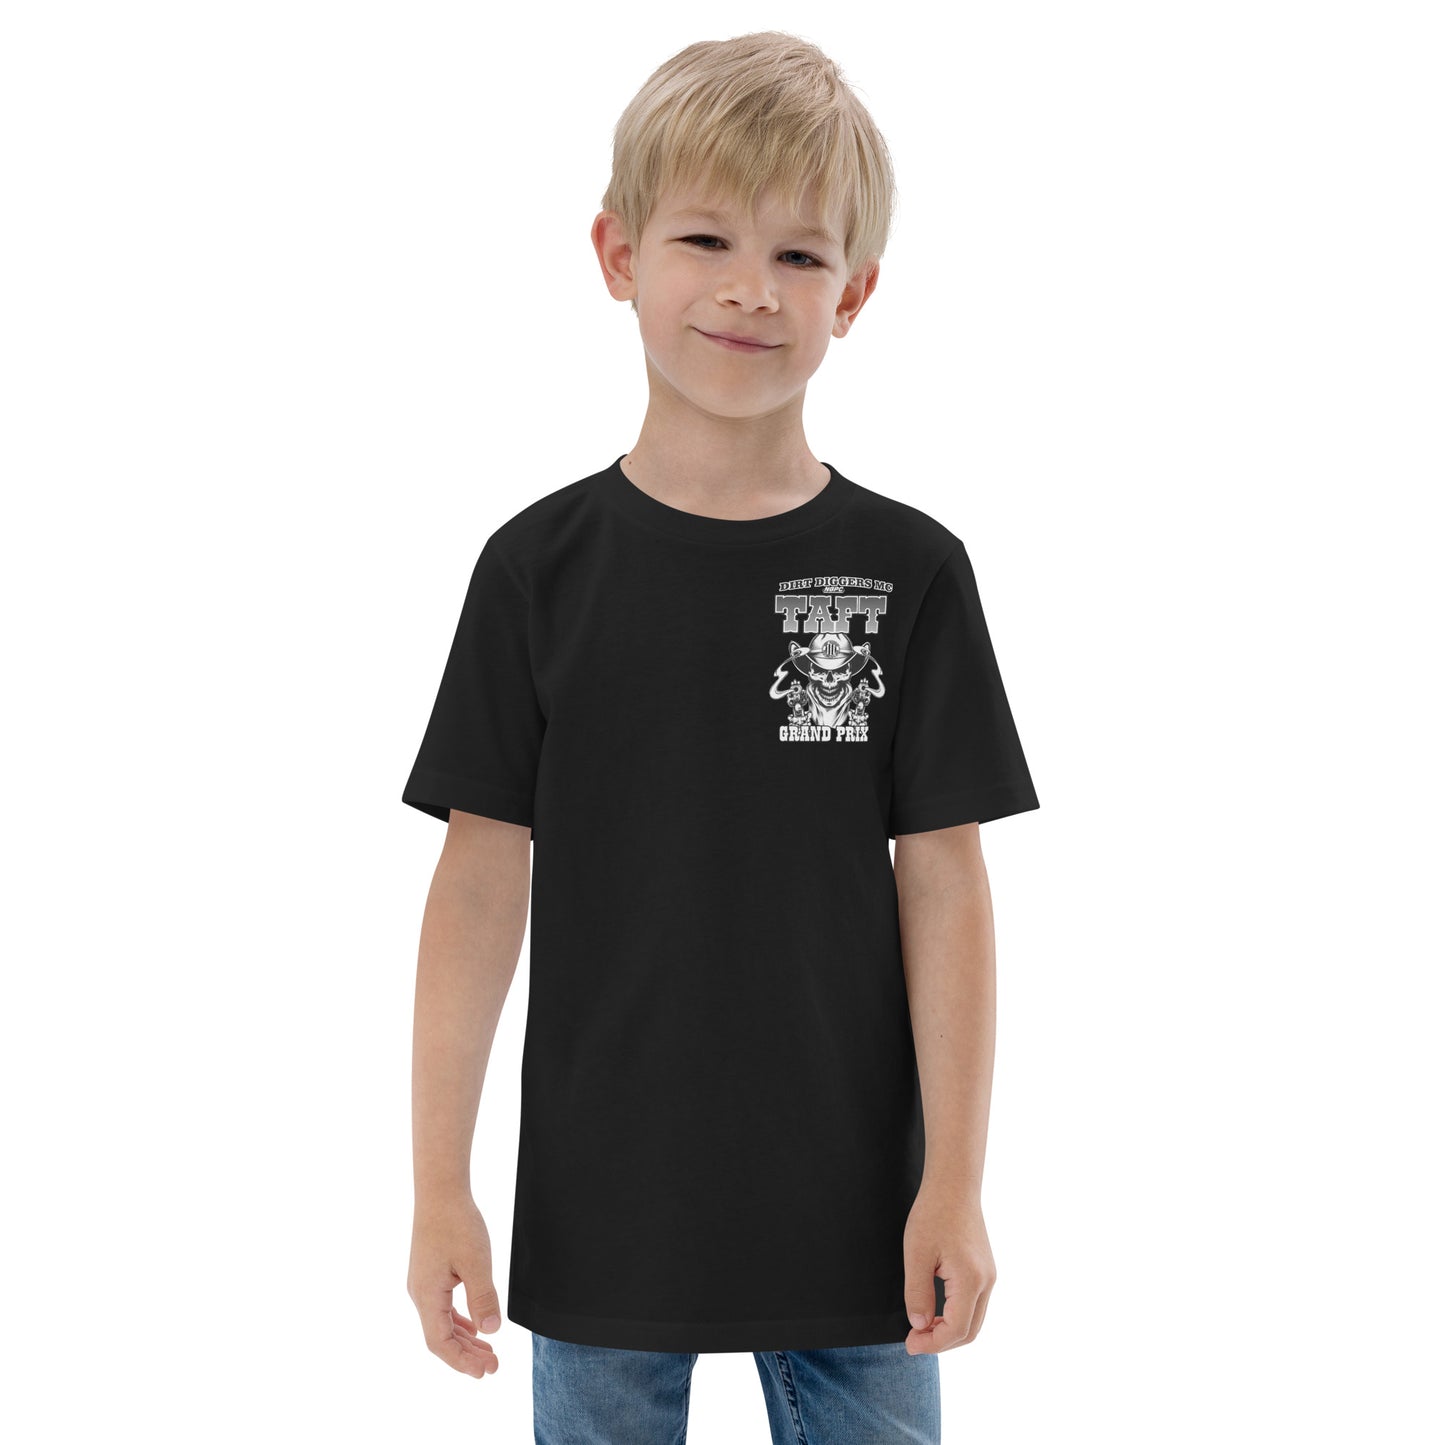 Youth - Dirt Diggers 2023 Taft Grand Prix Youth Event Shirt - NGPC